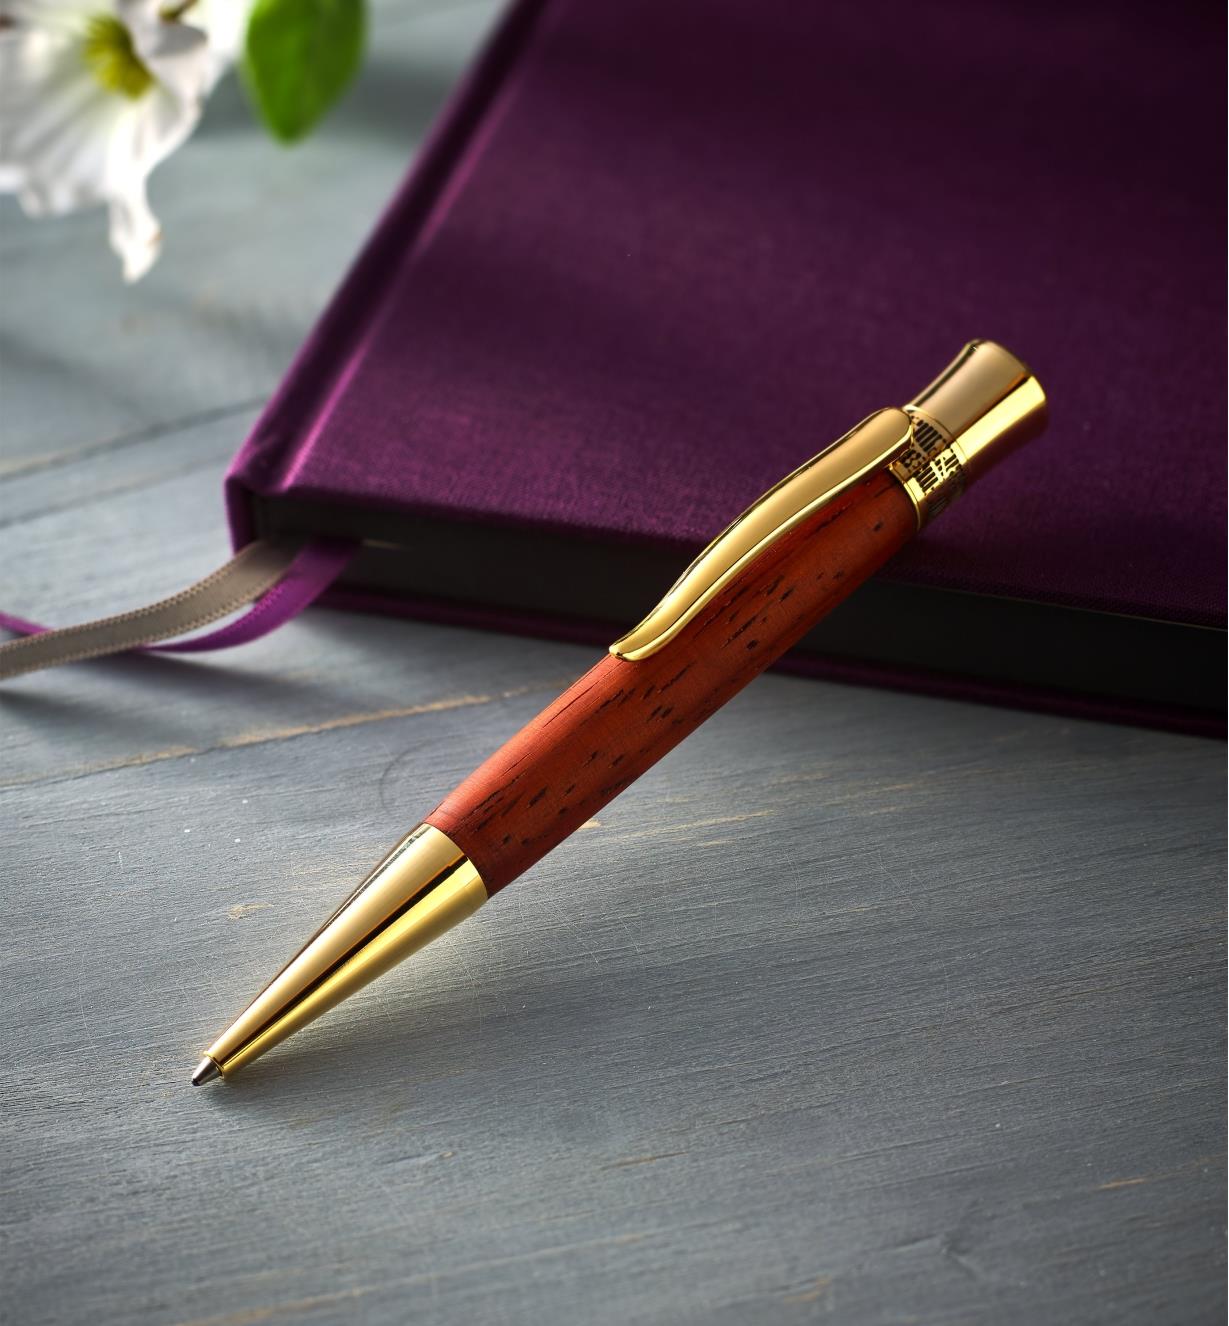 Example of a Glacia gold pen turned from a wood blank, propped on a closed journal 